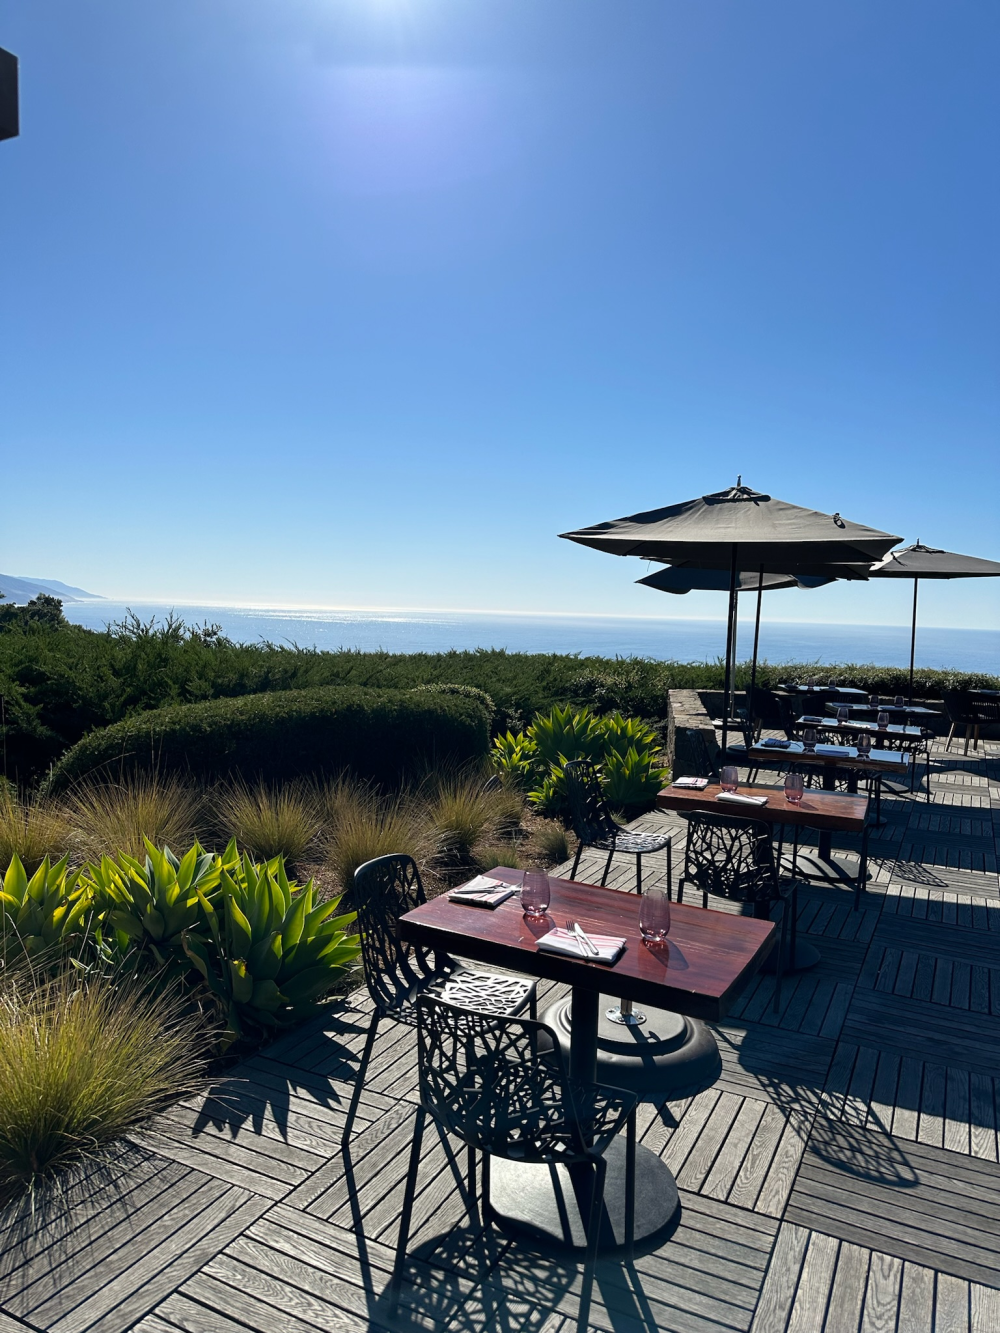 This is an image of outdoor patio tables at Alila Ventanaʻs restaurant Sur House in Big Sur. The patio tables are shaded by umbrellas. The bright blue ocean can be seen in the background